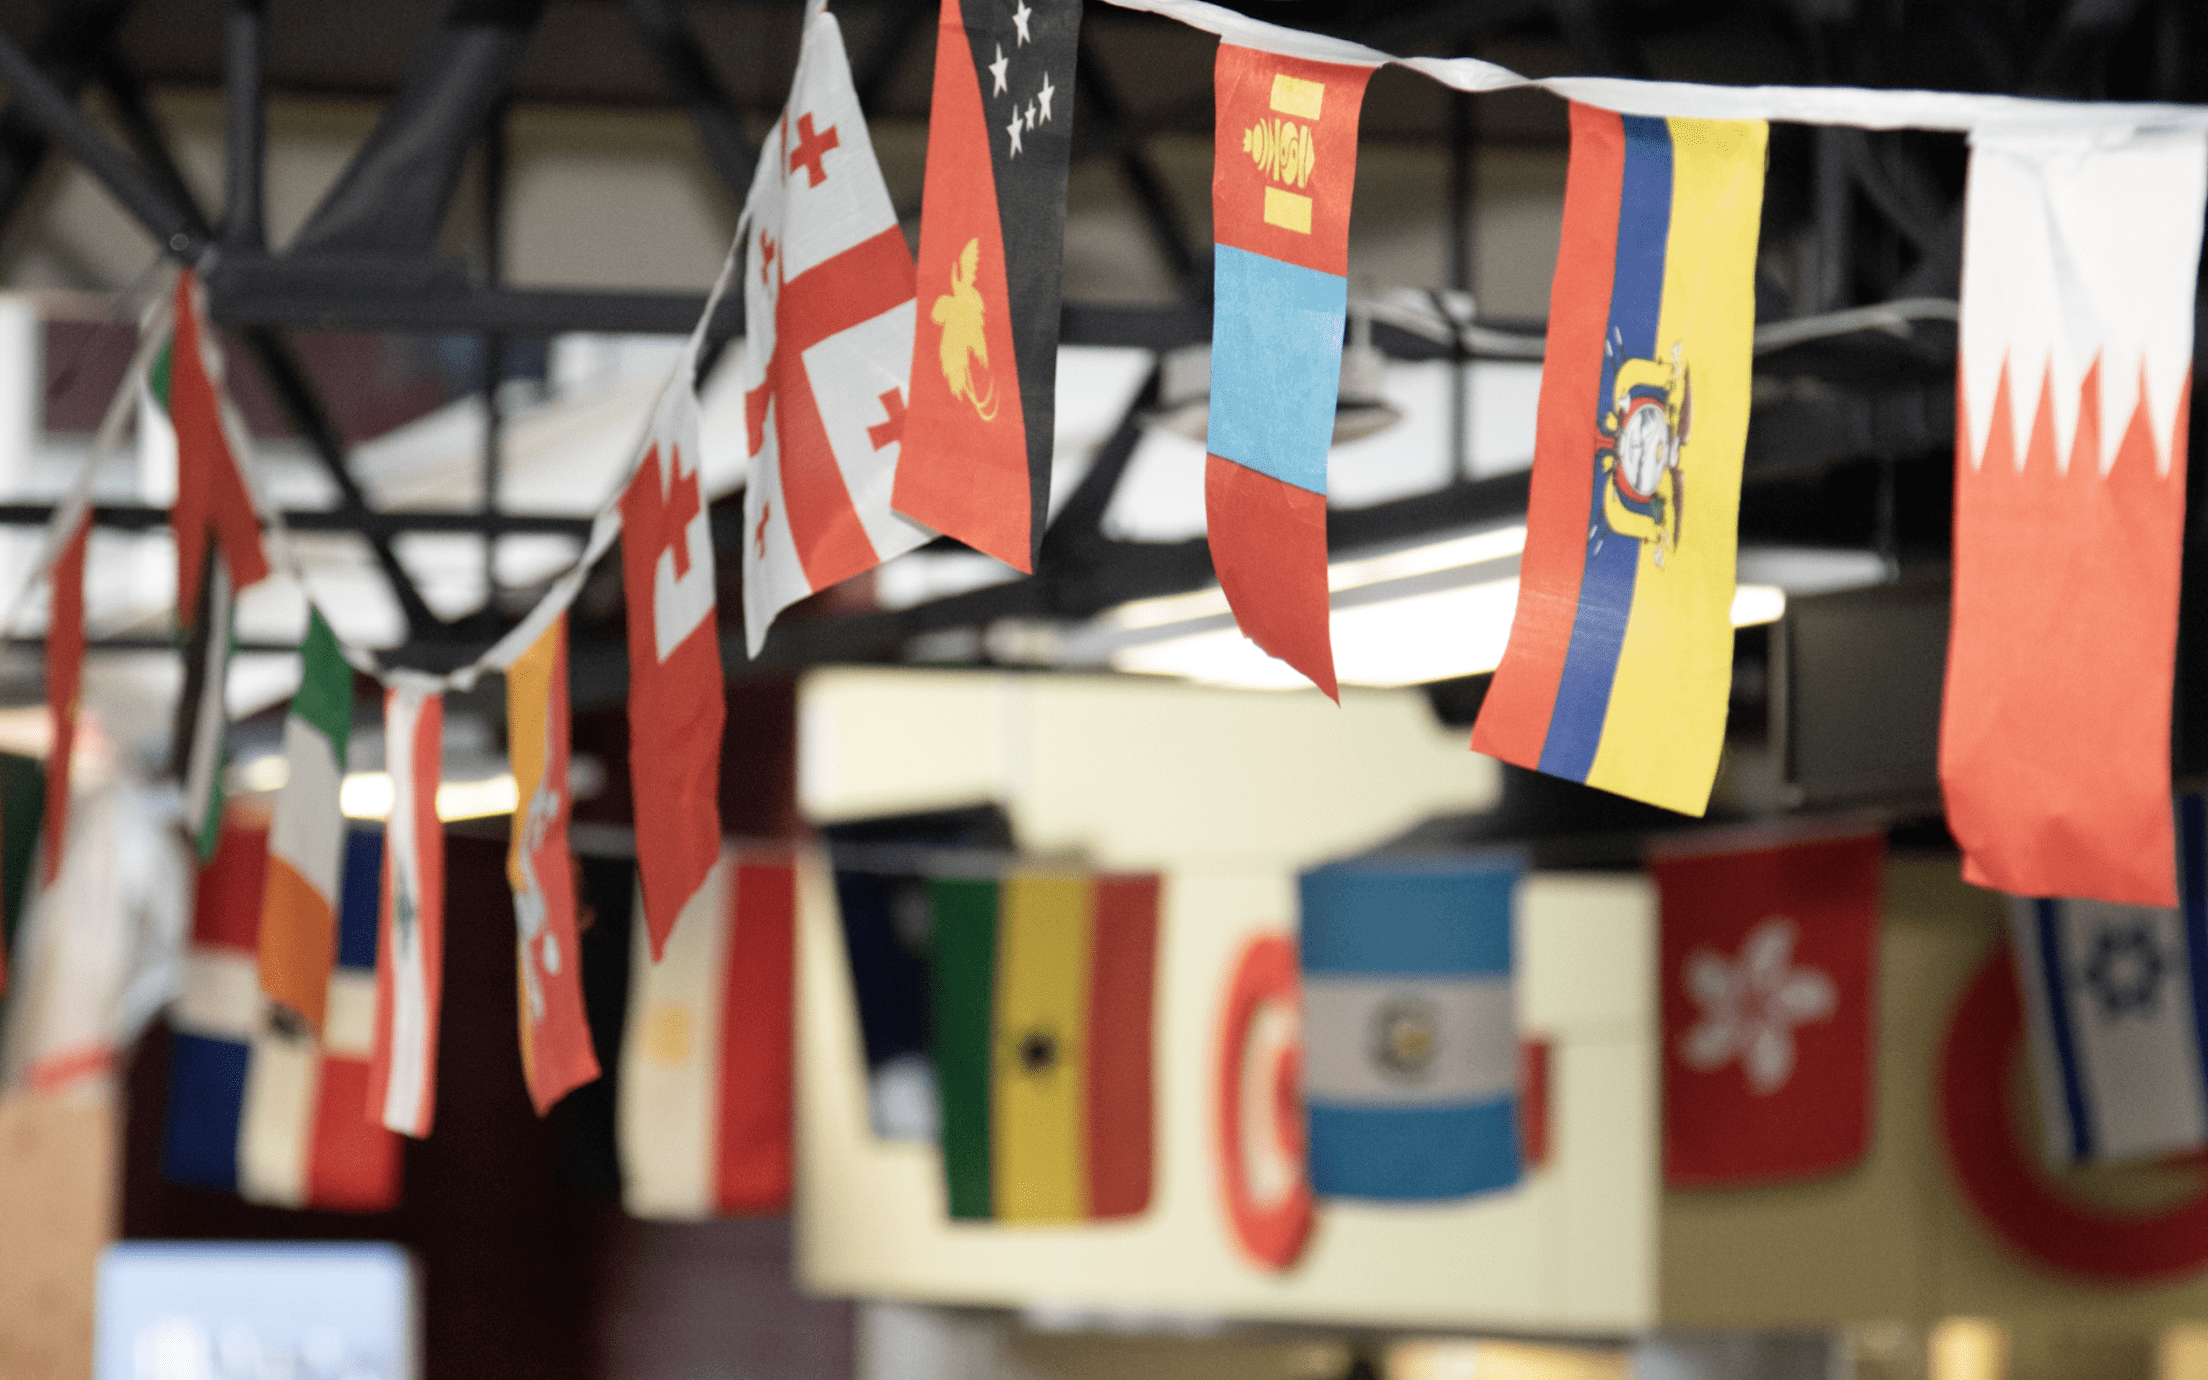 Flags from around the world strung on a banner